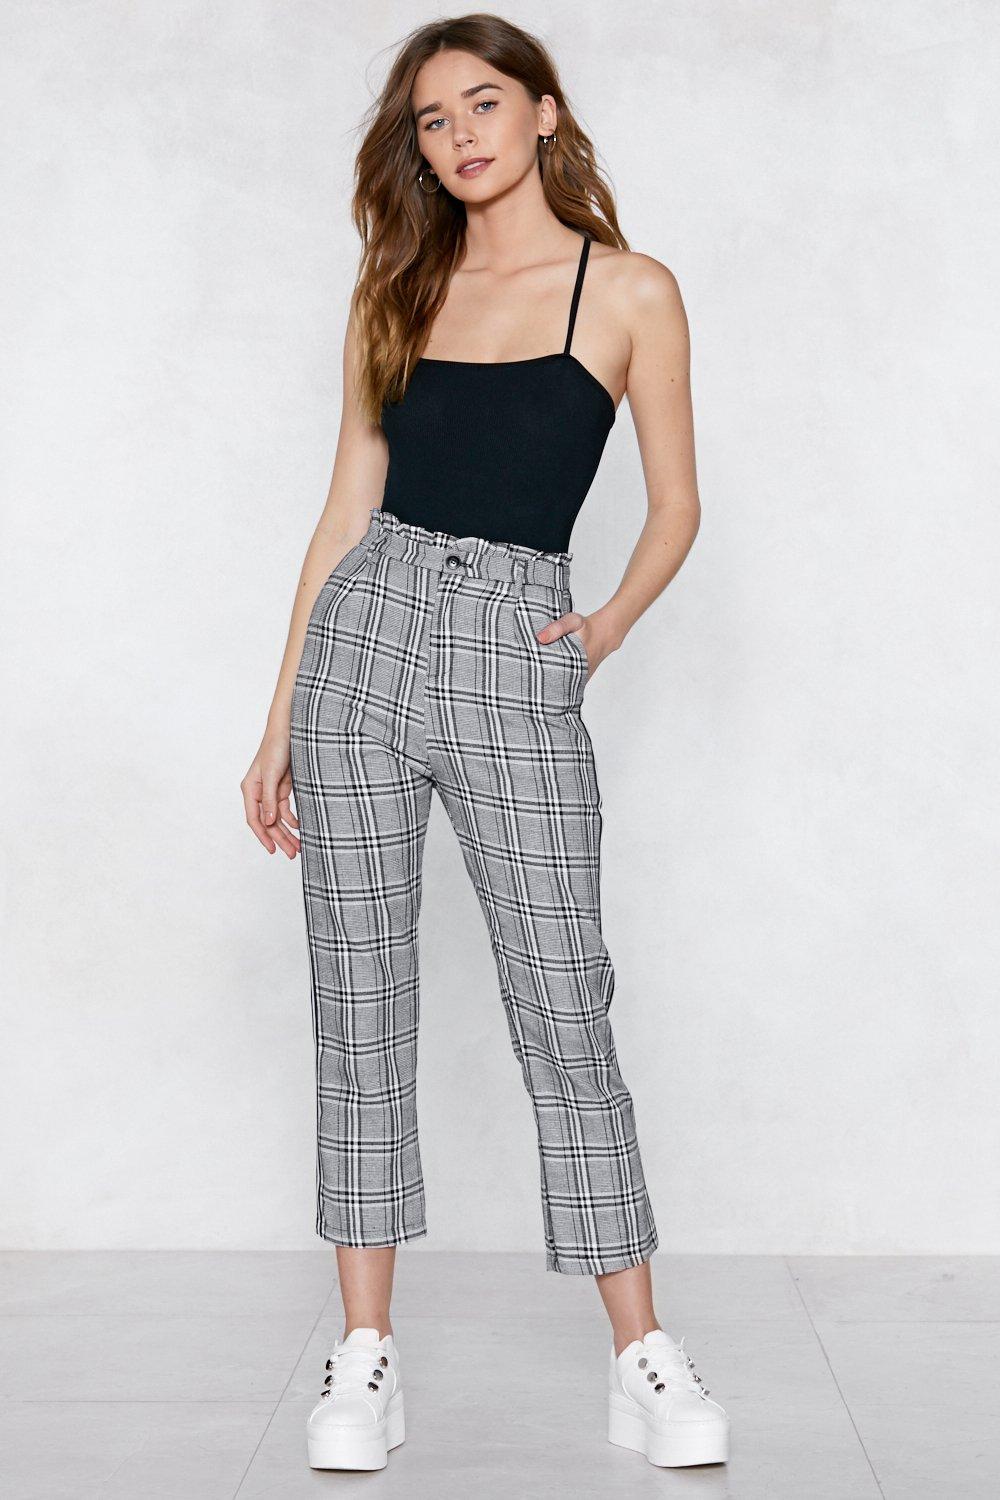 By My Side Plaid Pants | Nasty Gal